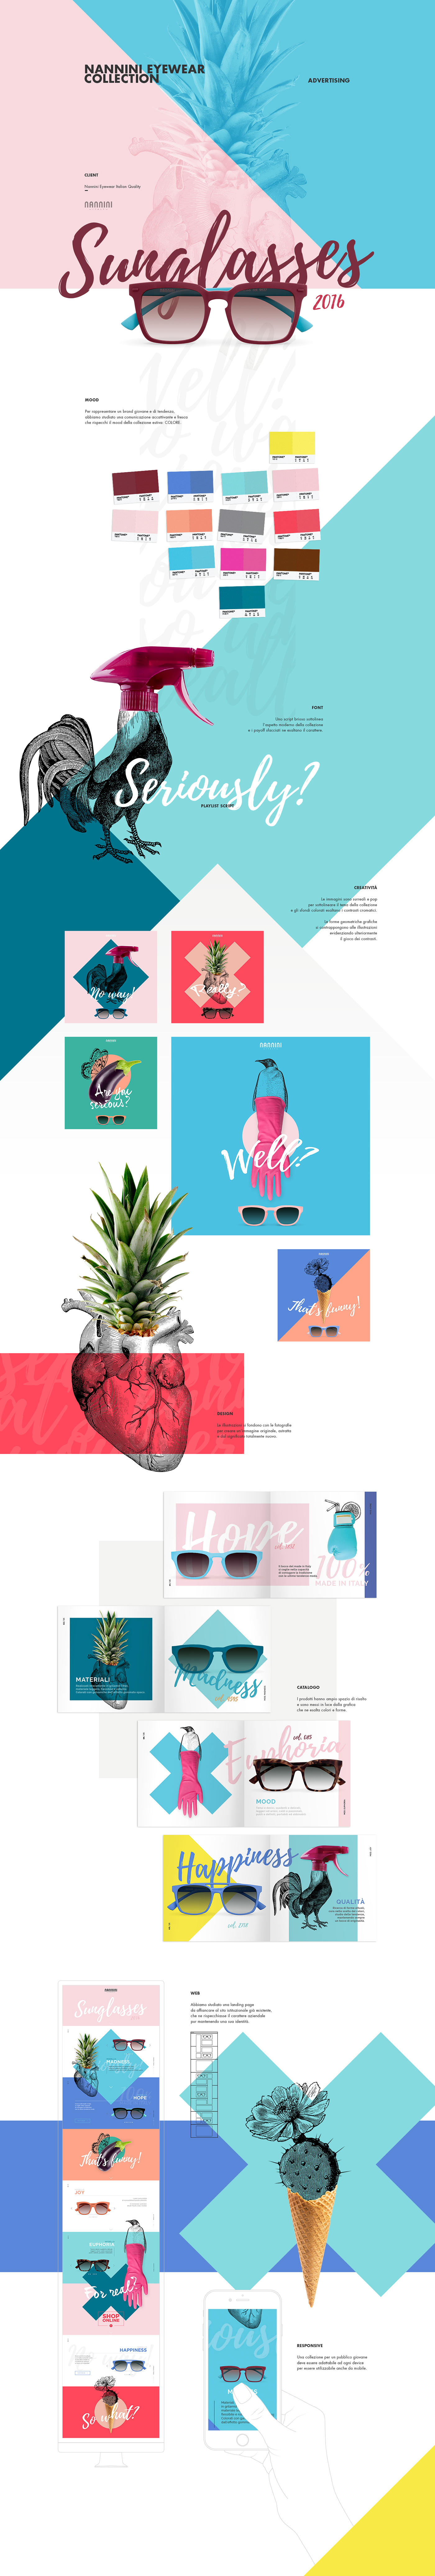 eyewear graphic design Catalogue pagination colors Sunglasses Web landing page Collection summer